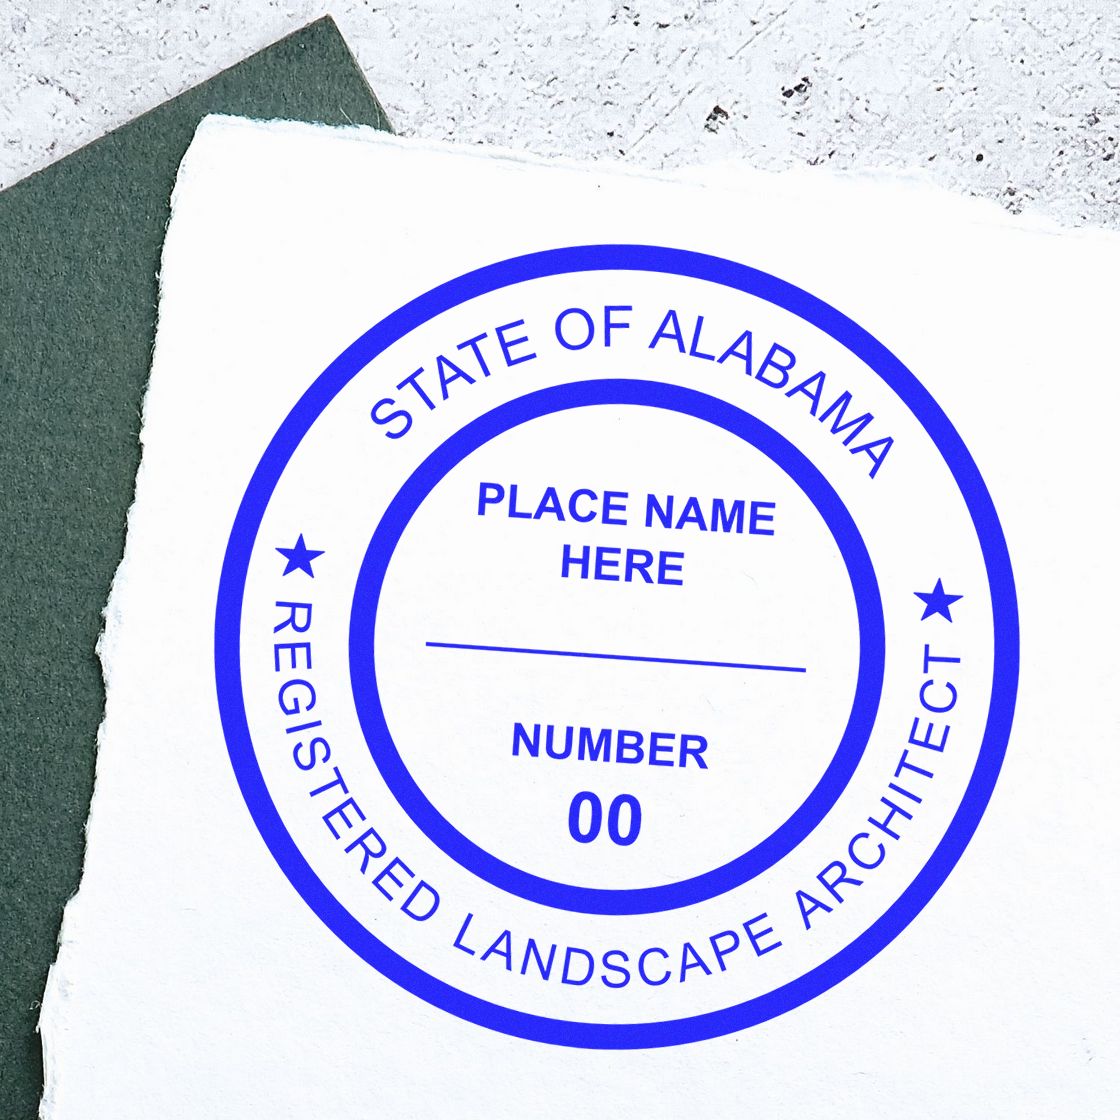 This paper is stamped with a sample imprint of the Self-Inking Alabama Landscape Architect Stamp, signifying its quality and reliability.